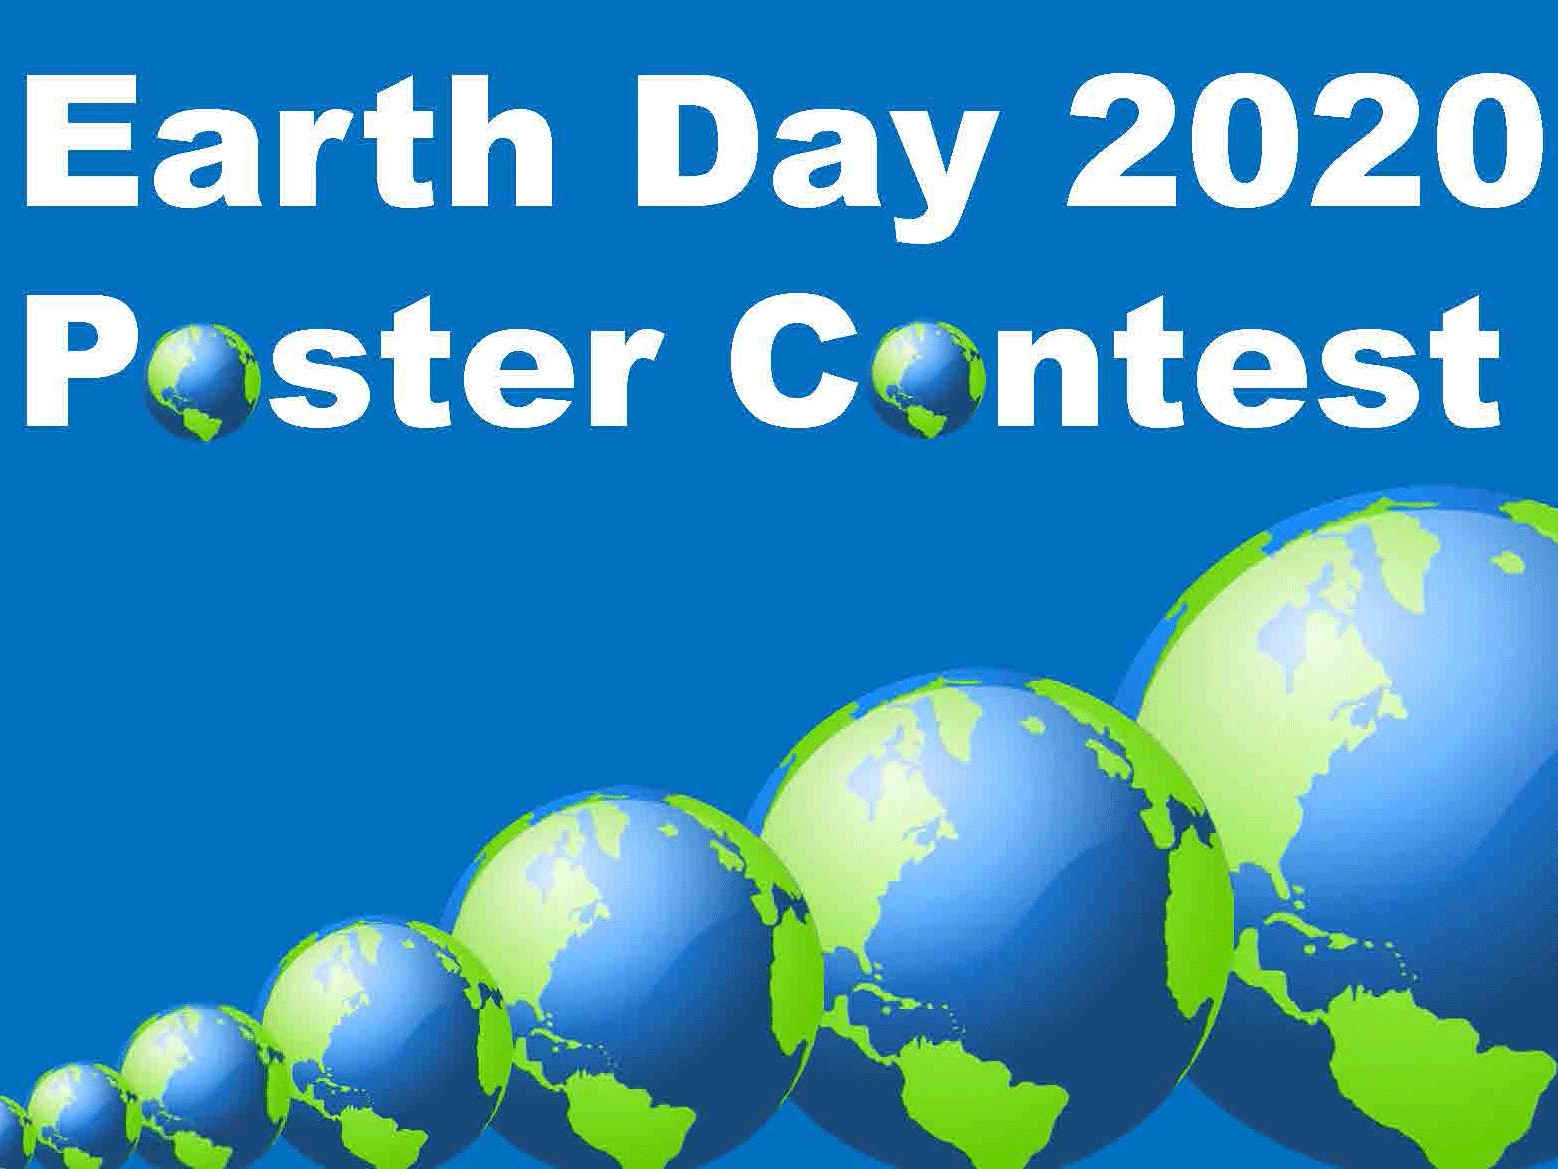 EOHSI Earth Day 2020 Poster Contest - EOHSI